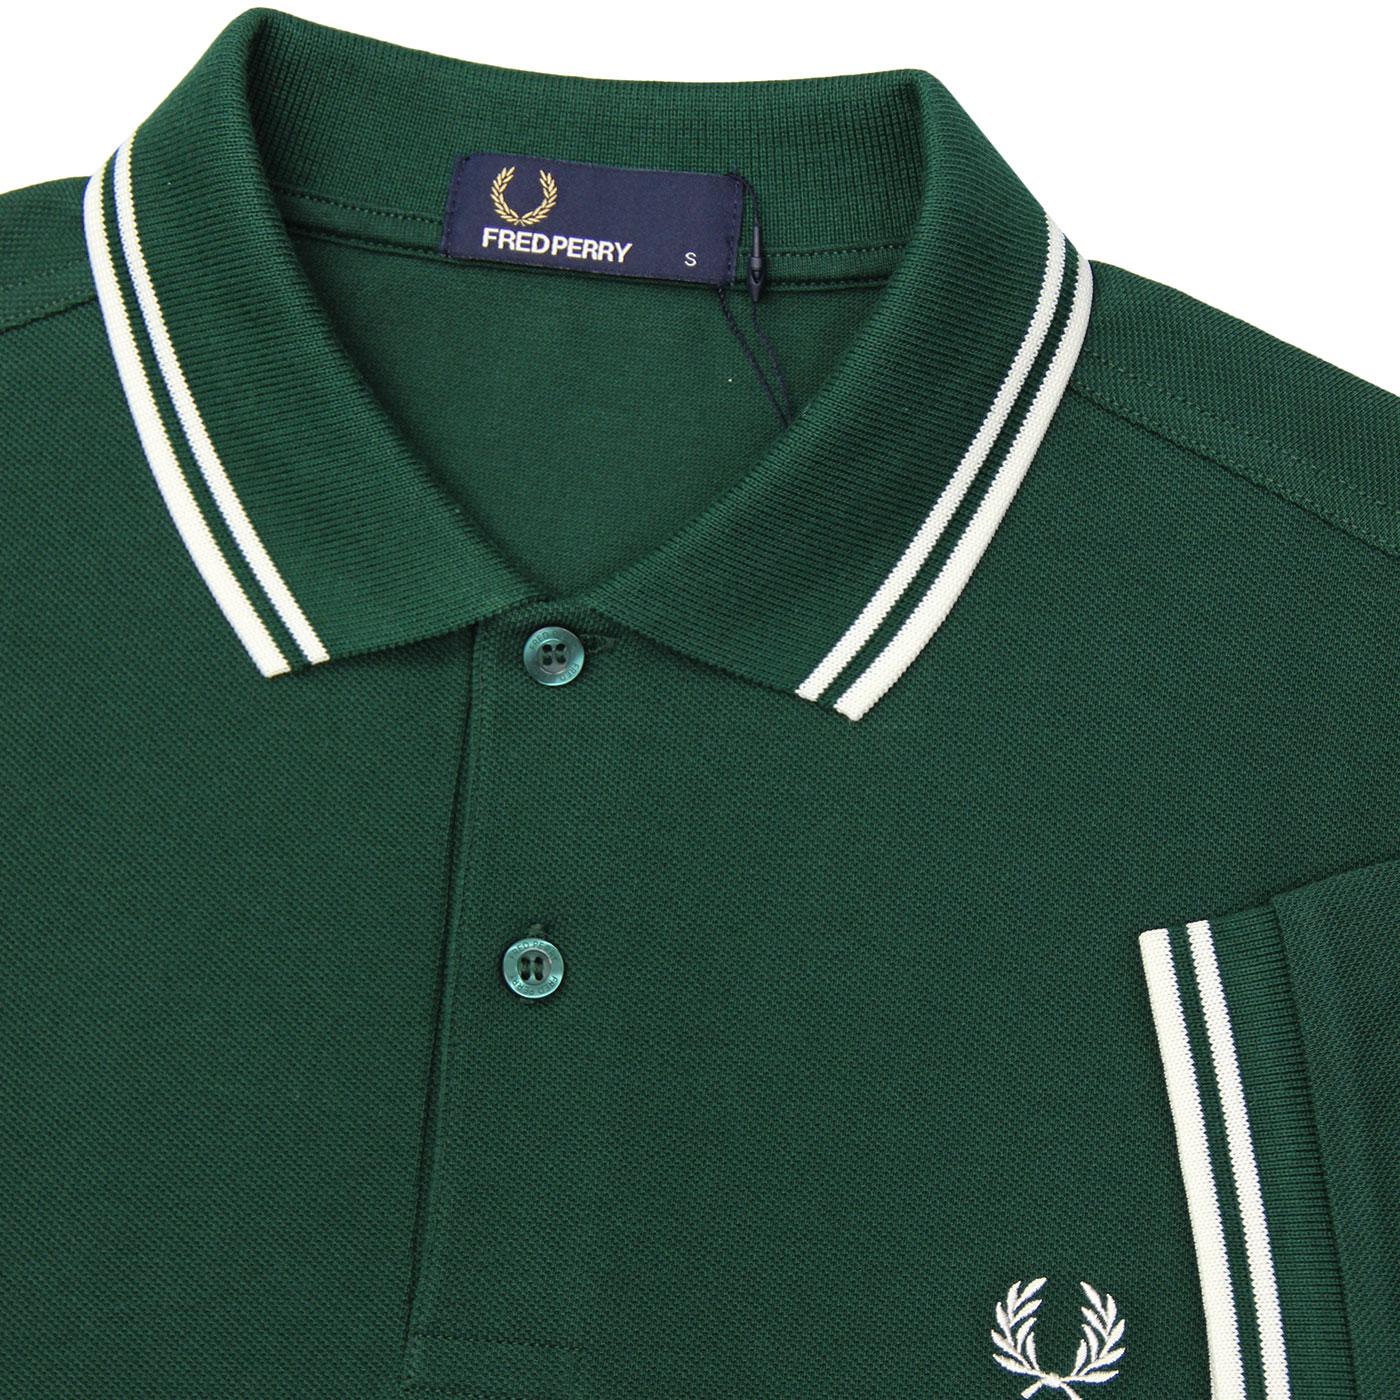 FRED PERRY M3600 Mod Twin Tipped Polo Top in Ivy Green